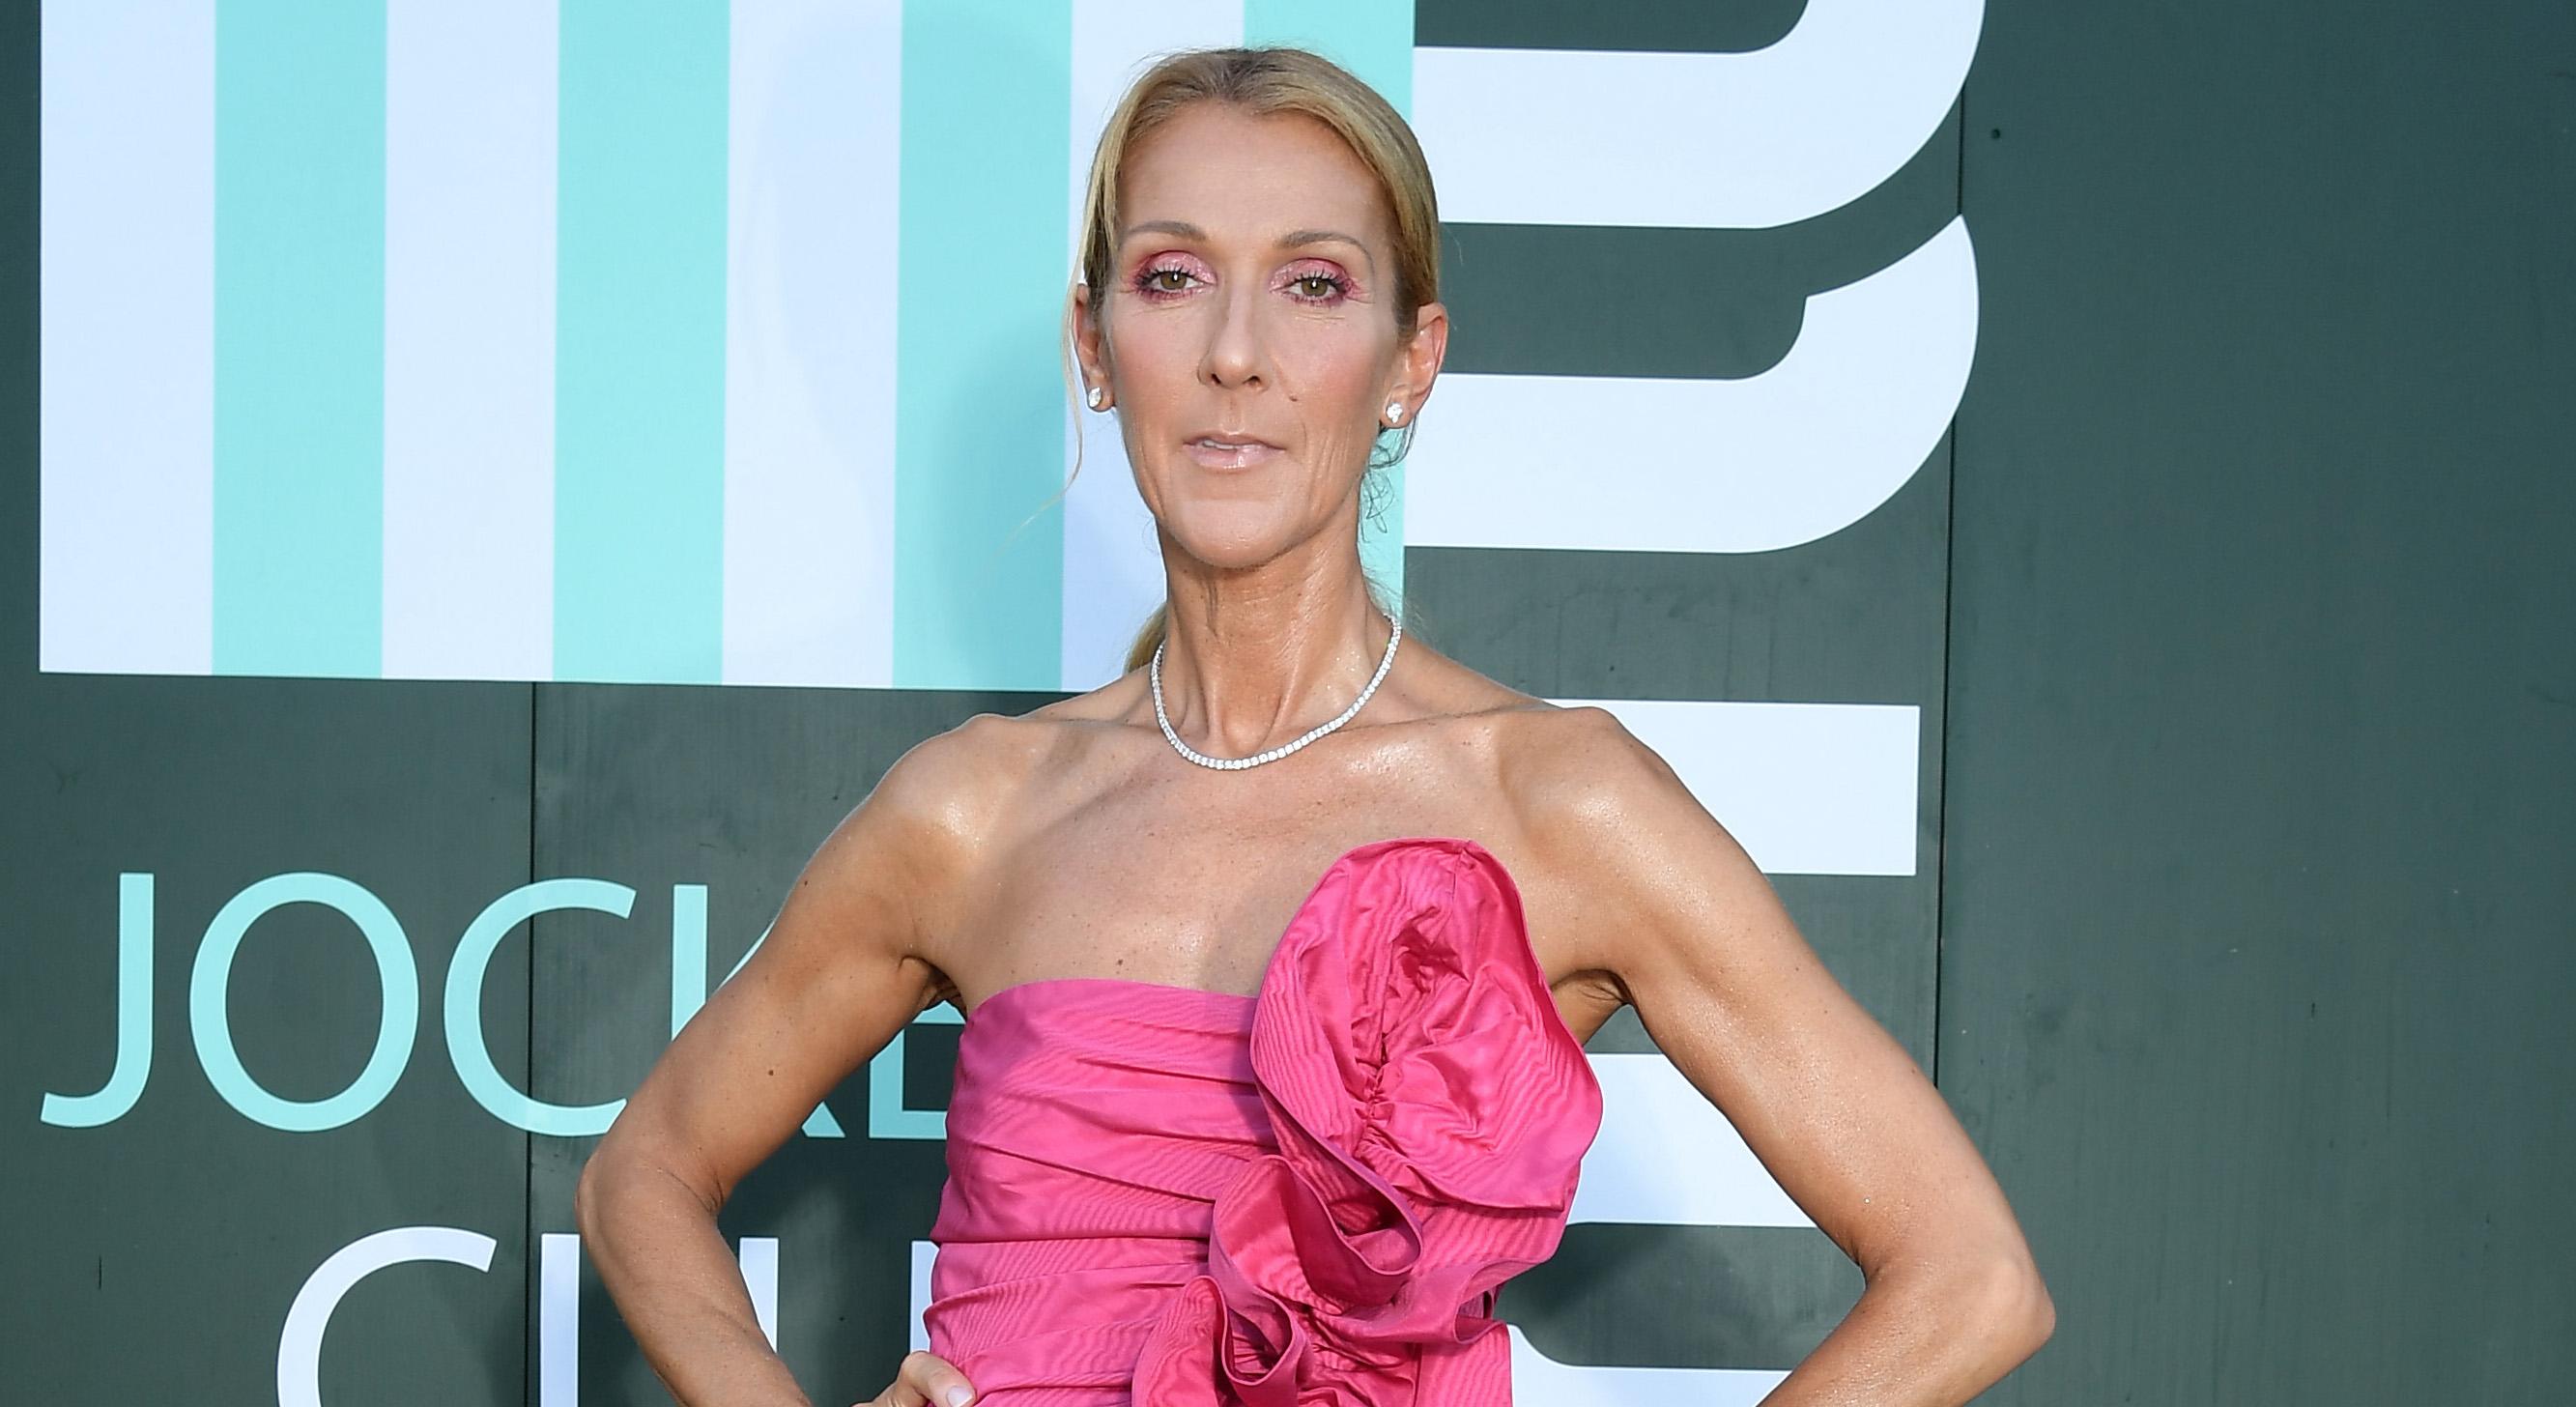 What illness does celine dion have